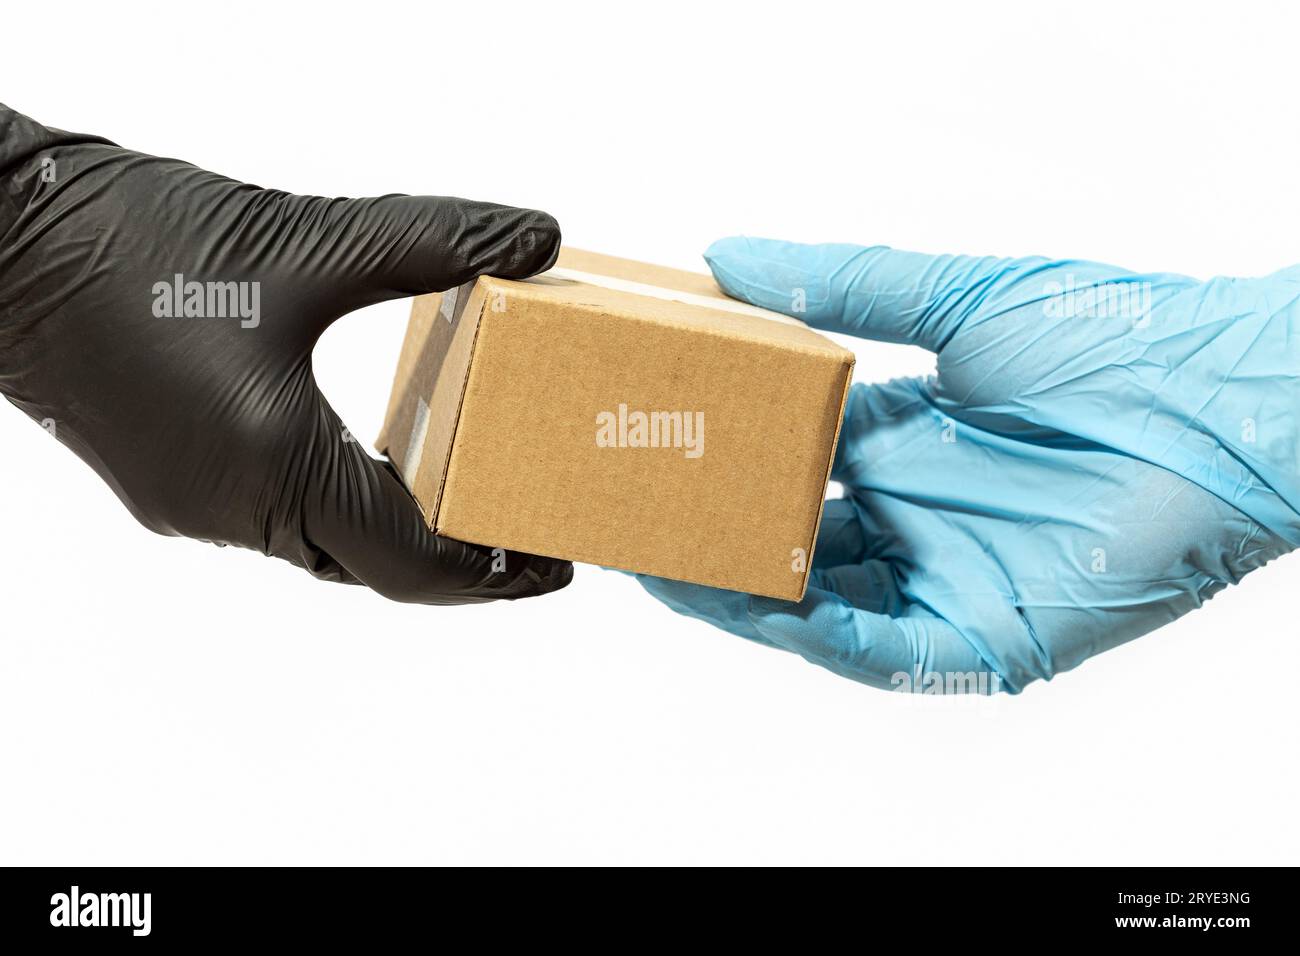 https://c8.alamy.com/comp/2RYE3NG/courier-man-hand-in-protective-glove-delivering-a-package-to-a-customer-or-online-buyer-2RYE3NG.jpg